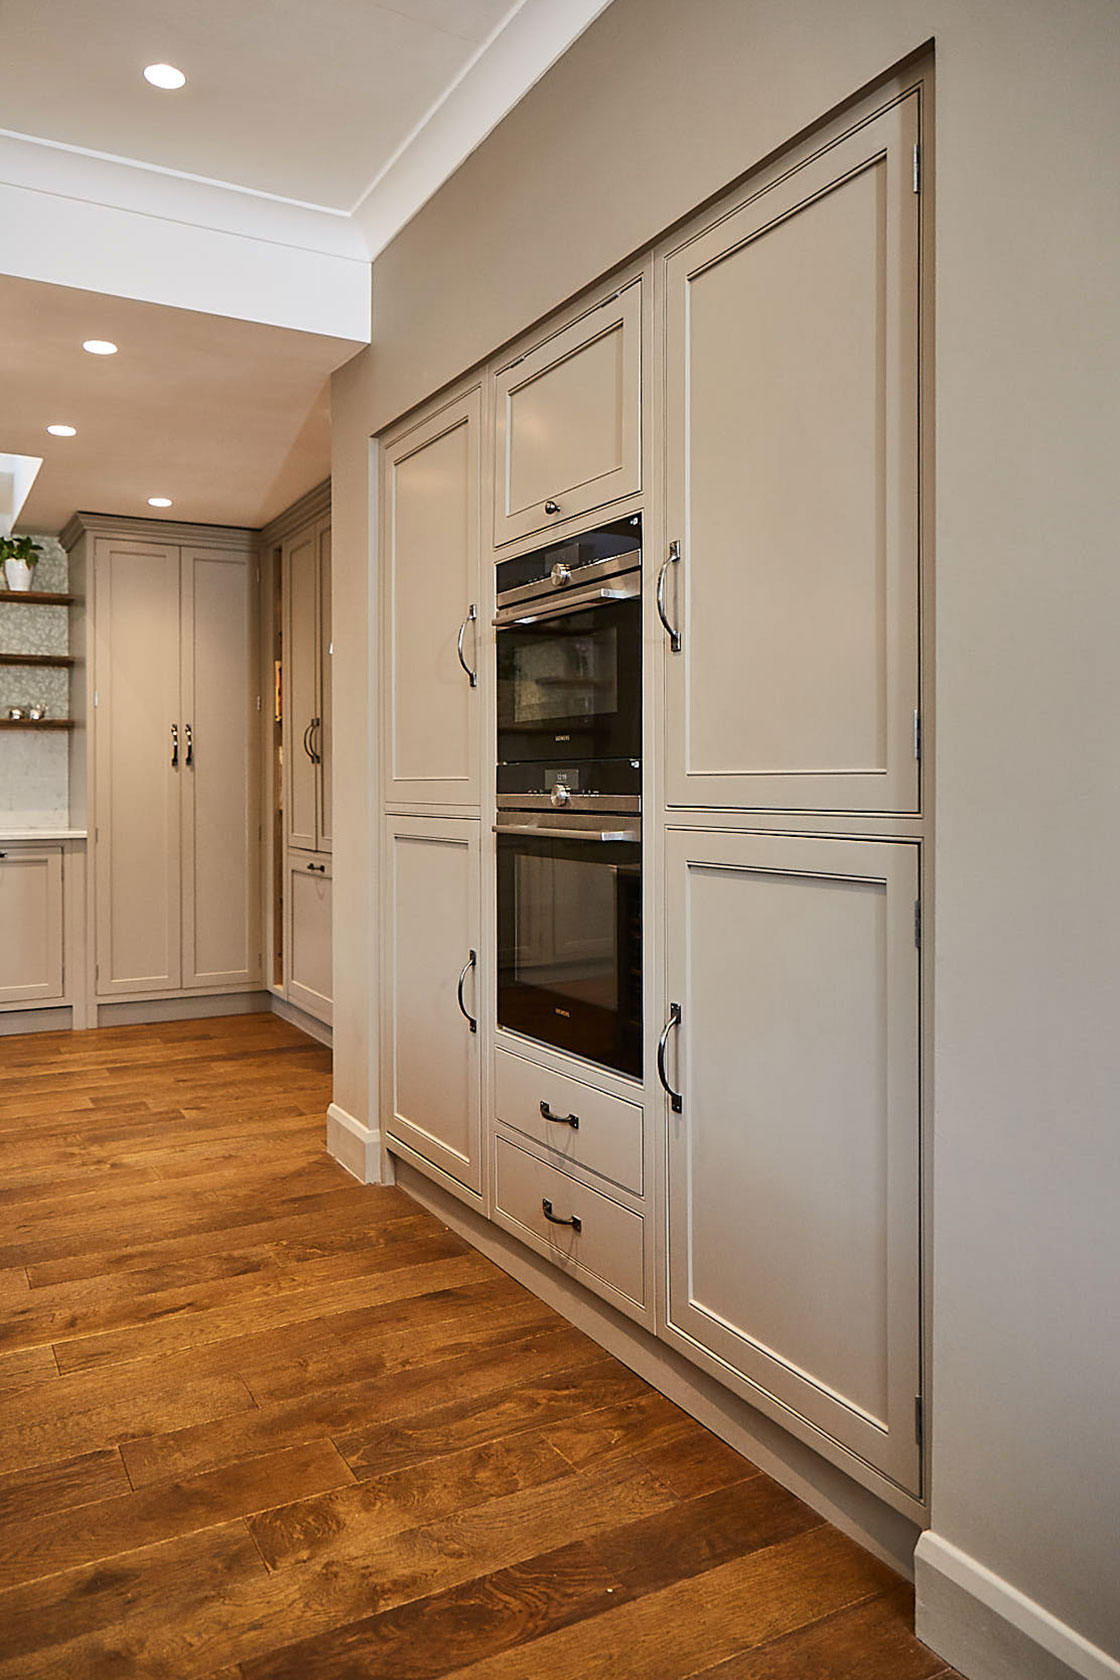 Integrated eye level Siemens oven in traditional painted cabinet